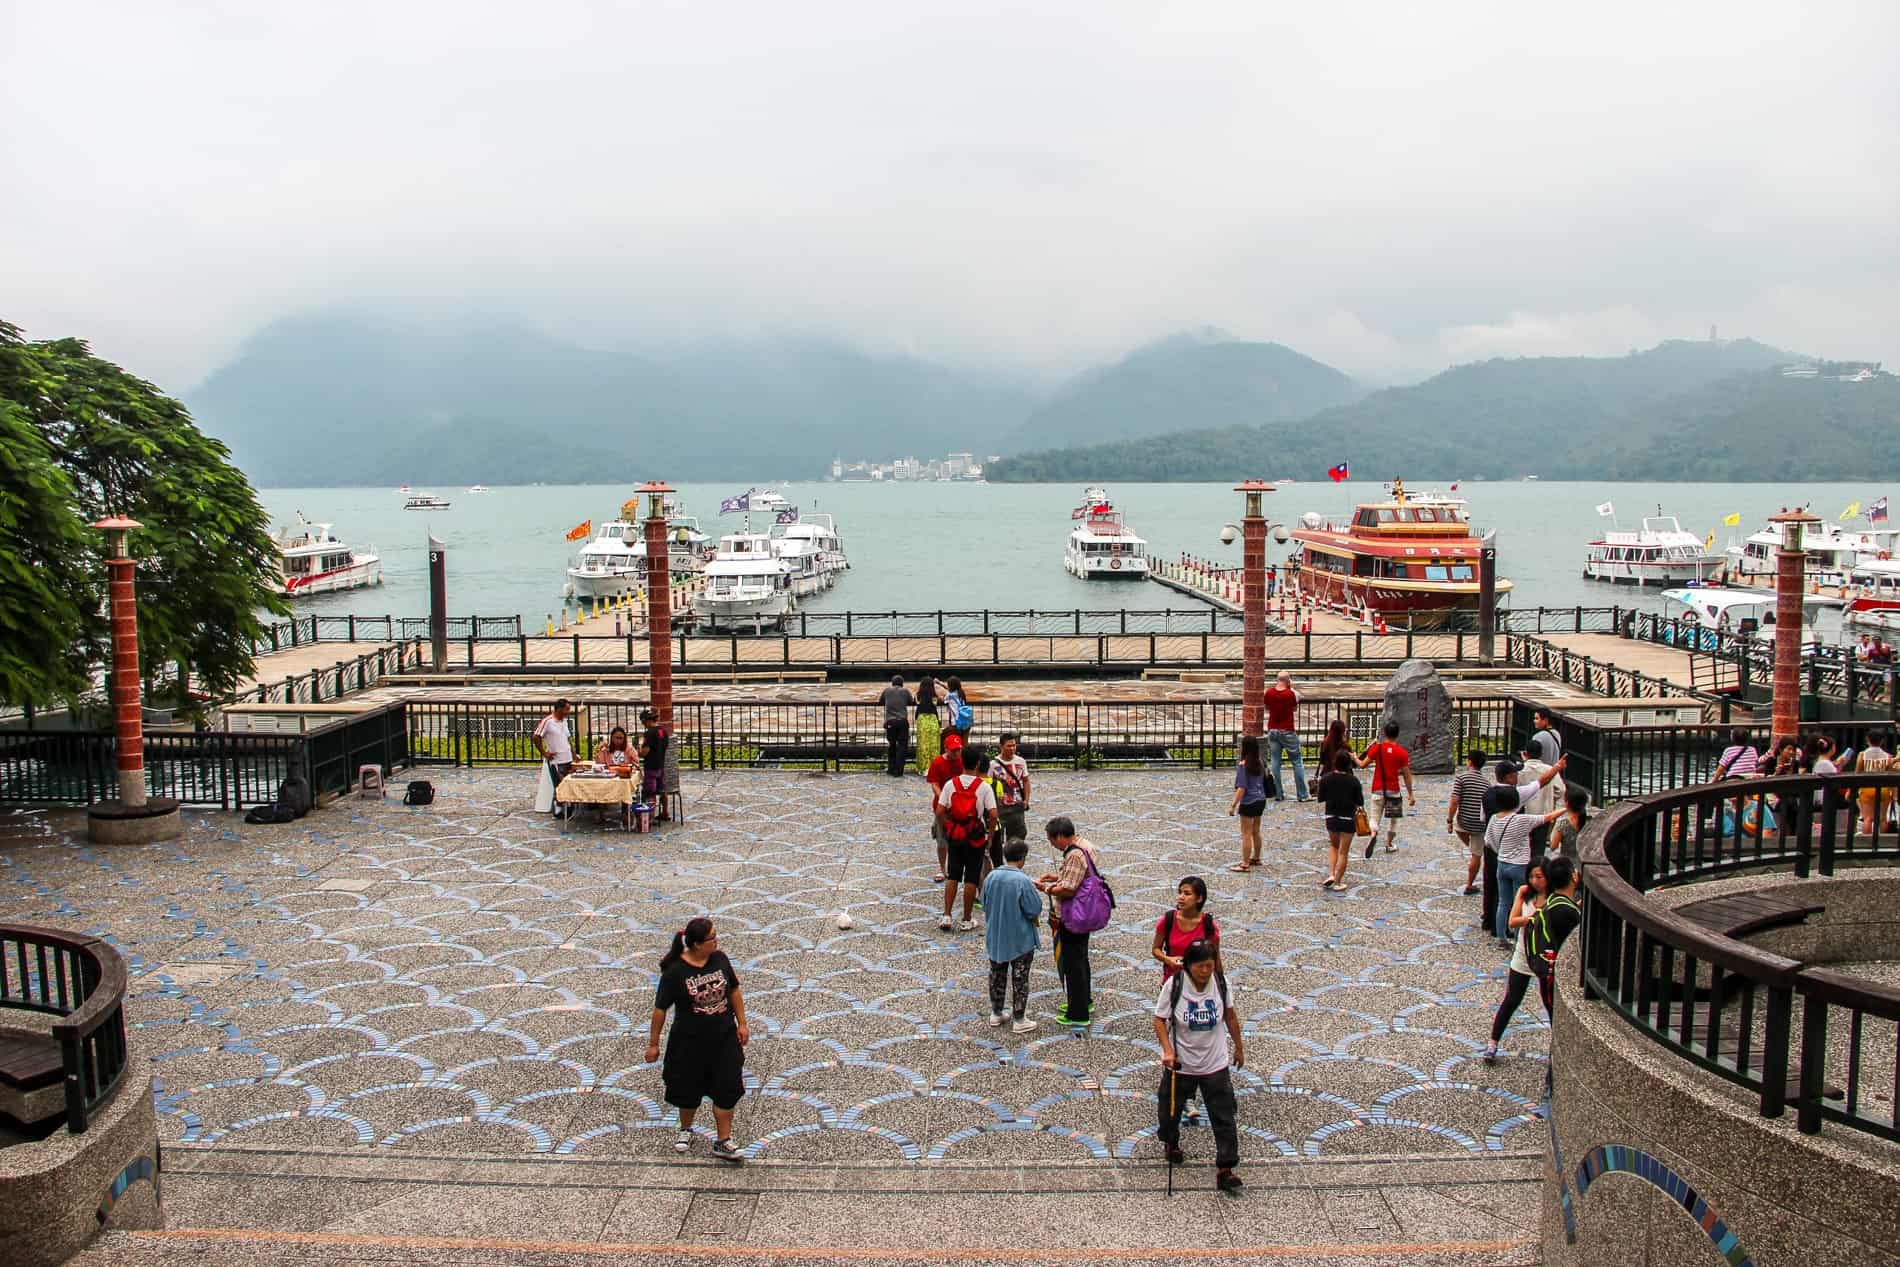 Boat dock and visitors at a pier at Sun Moon Lake in Taiwan, backed by mountains.